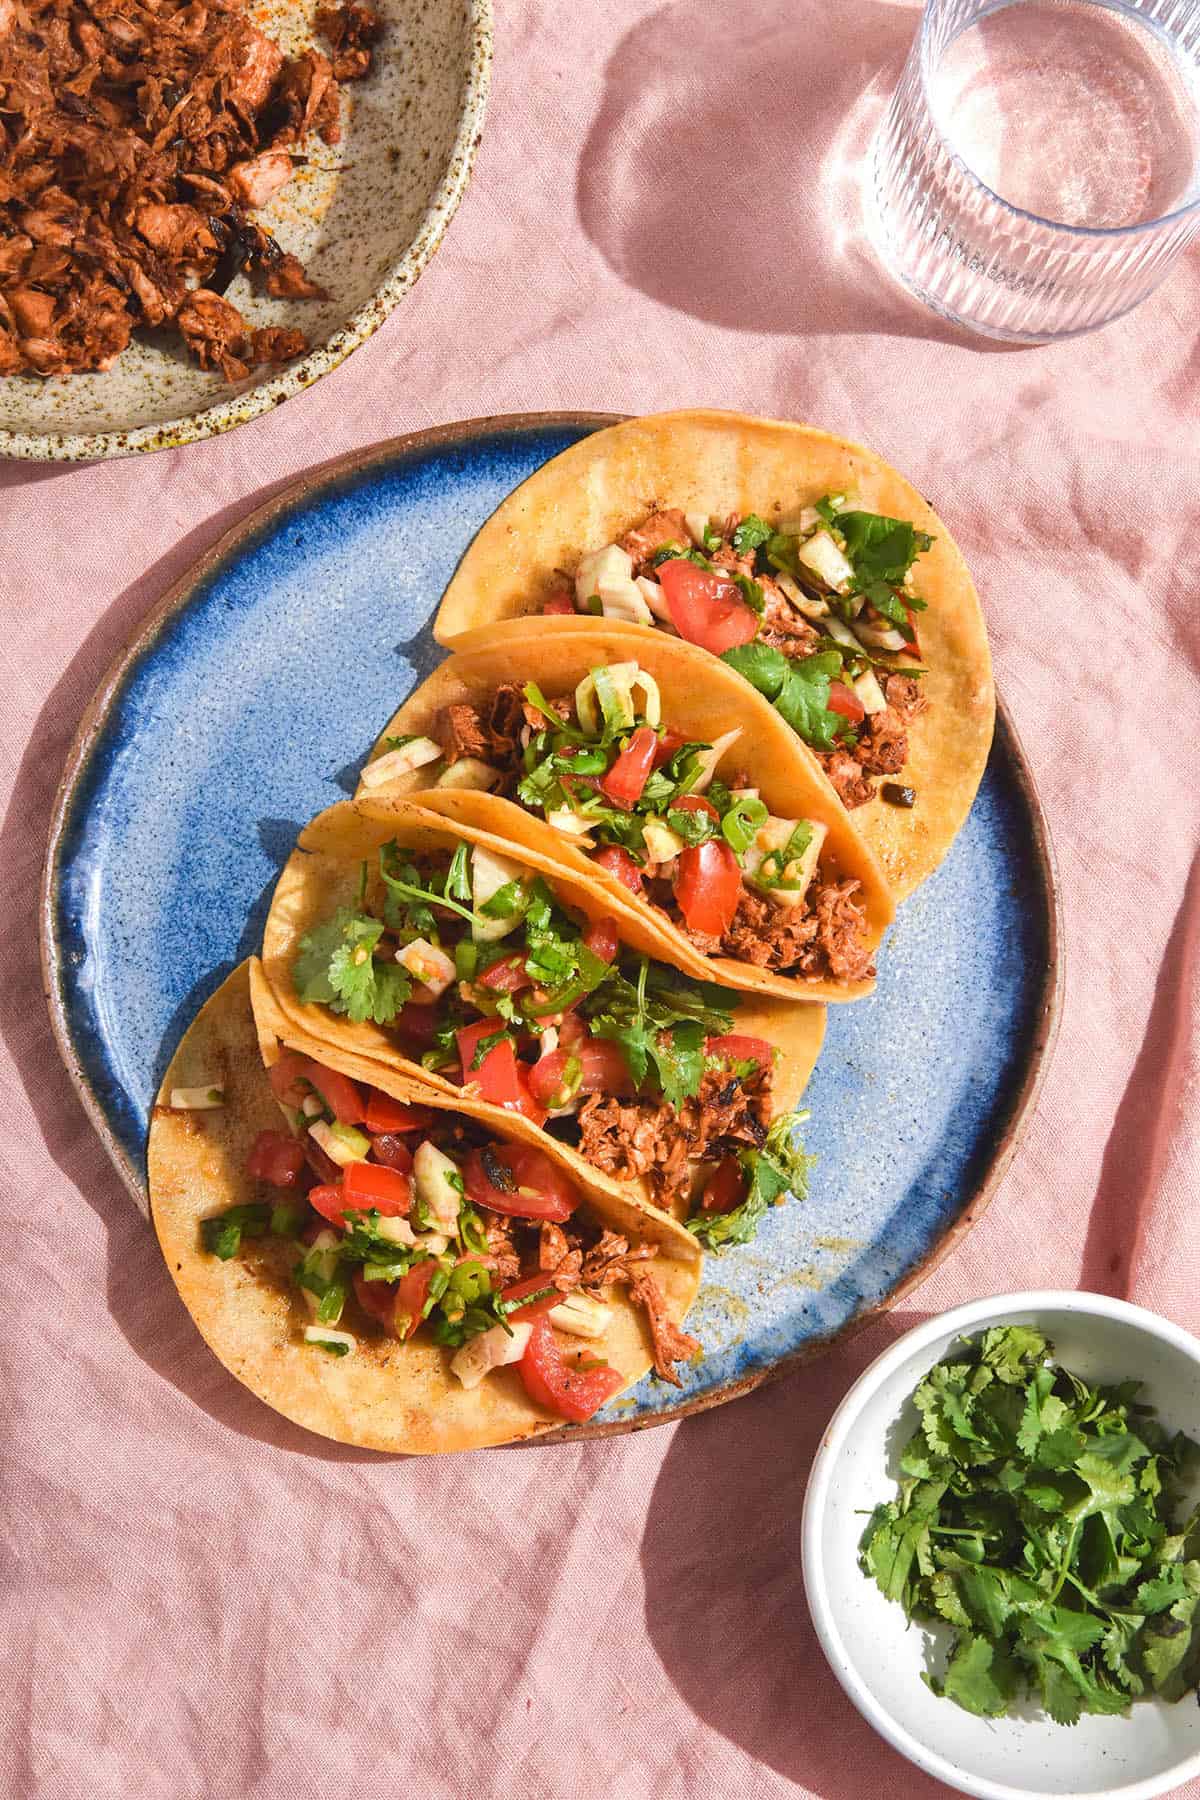 An aerial image of low FODMAP jackfruit tacos topped with pico de gallo on a bright blue ceramic plate. The plate sits atop a pale pink linen tablecloth/